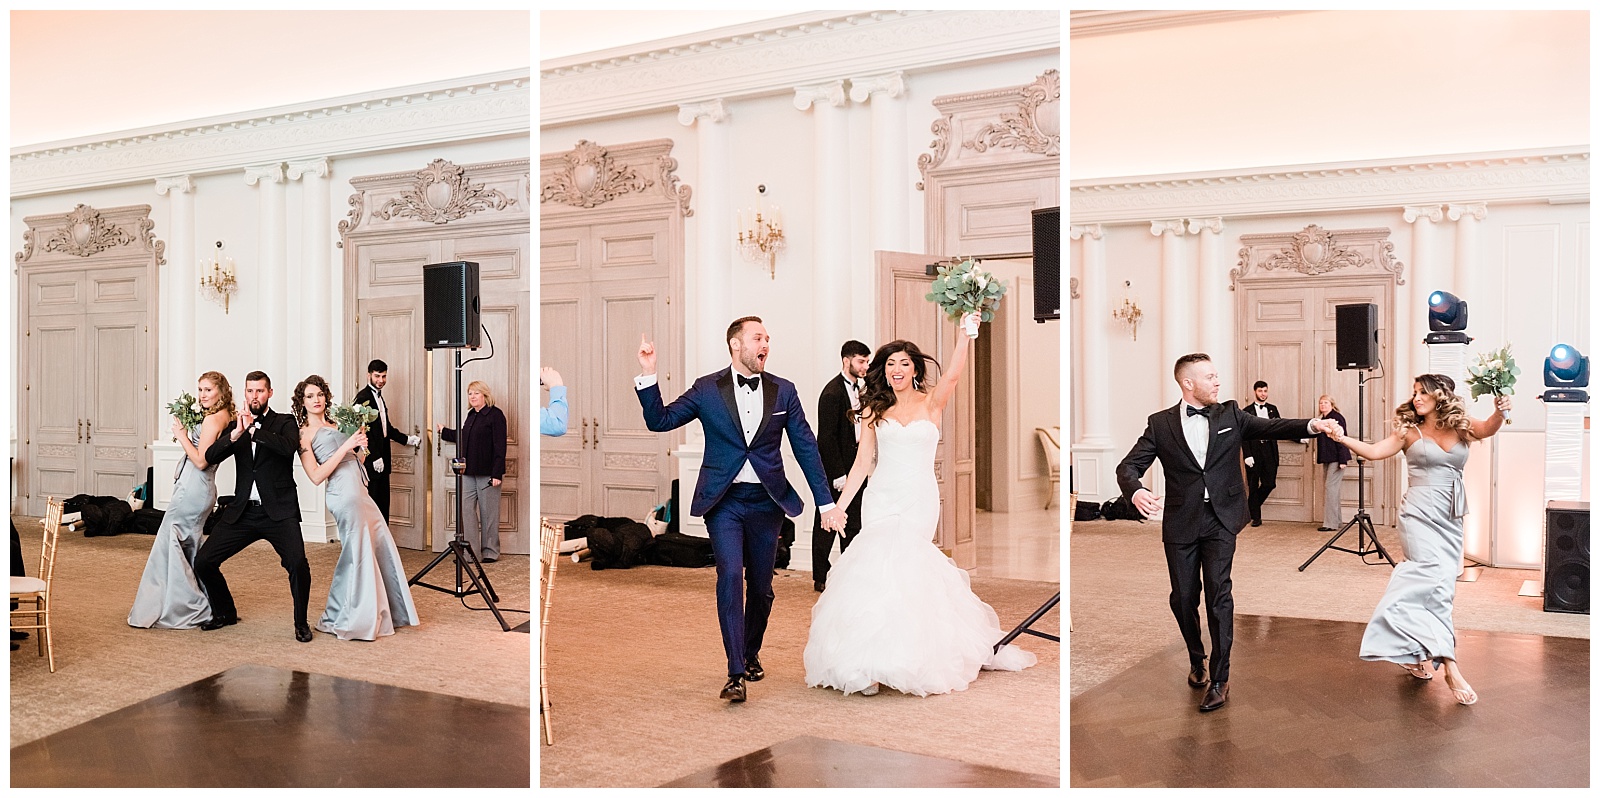 Park Chateau Wedding, Photographer, New Jersey, NJ, Winter, Reception Details, Ballroom, Light and Airy, Introductions, entrances